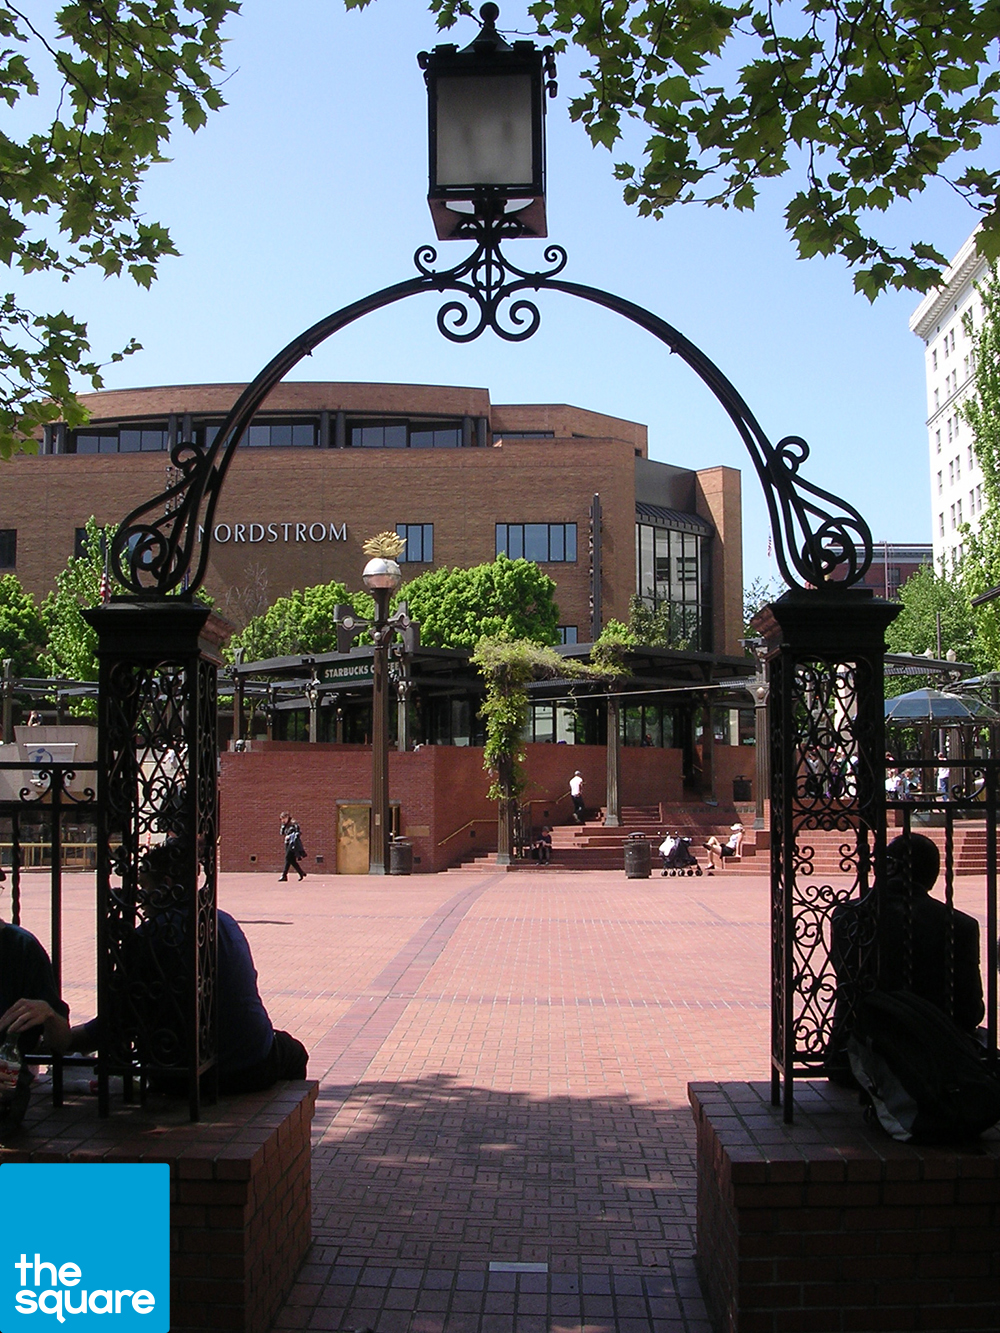 Portland Hotel Gate - Located where it once stood at the original Portland Hotel entry, the exquisite gate is directly across from Pioneer Courthouse. The wrought iron gate and fence are believed to have been designed by McKim, Mead and White, architects of the Portland Hotel. During the hotel's history only one president, Warren Harding, did not pass beneath this lovely feature.